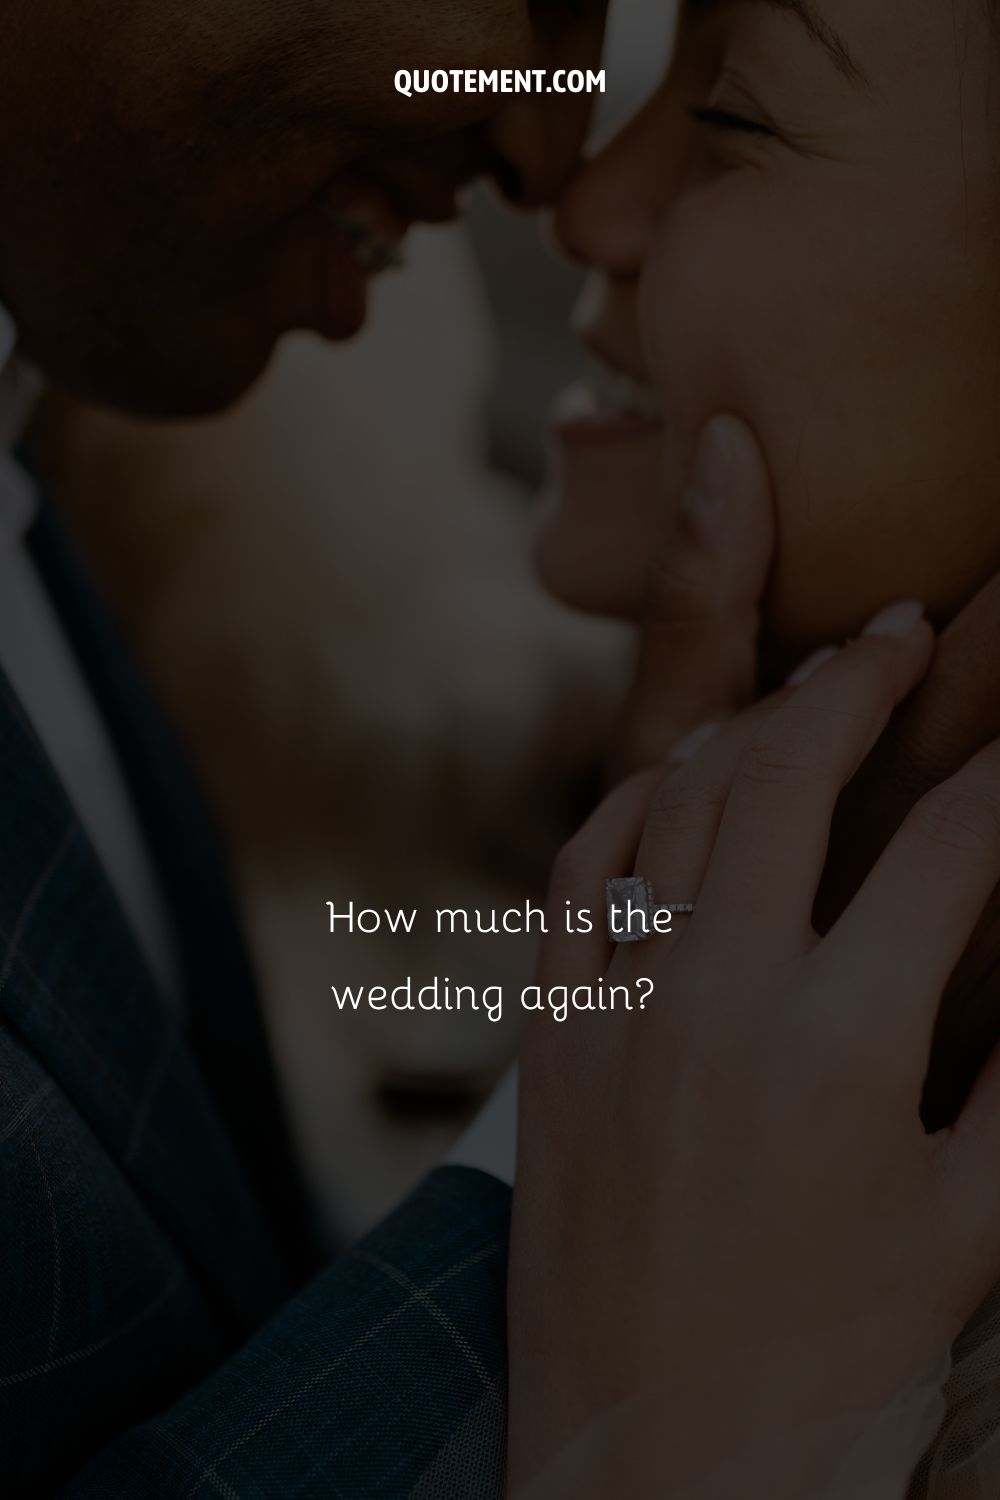 How much is the wedding again